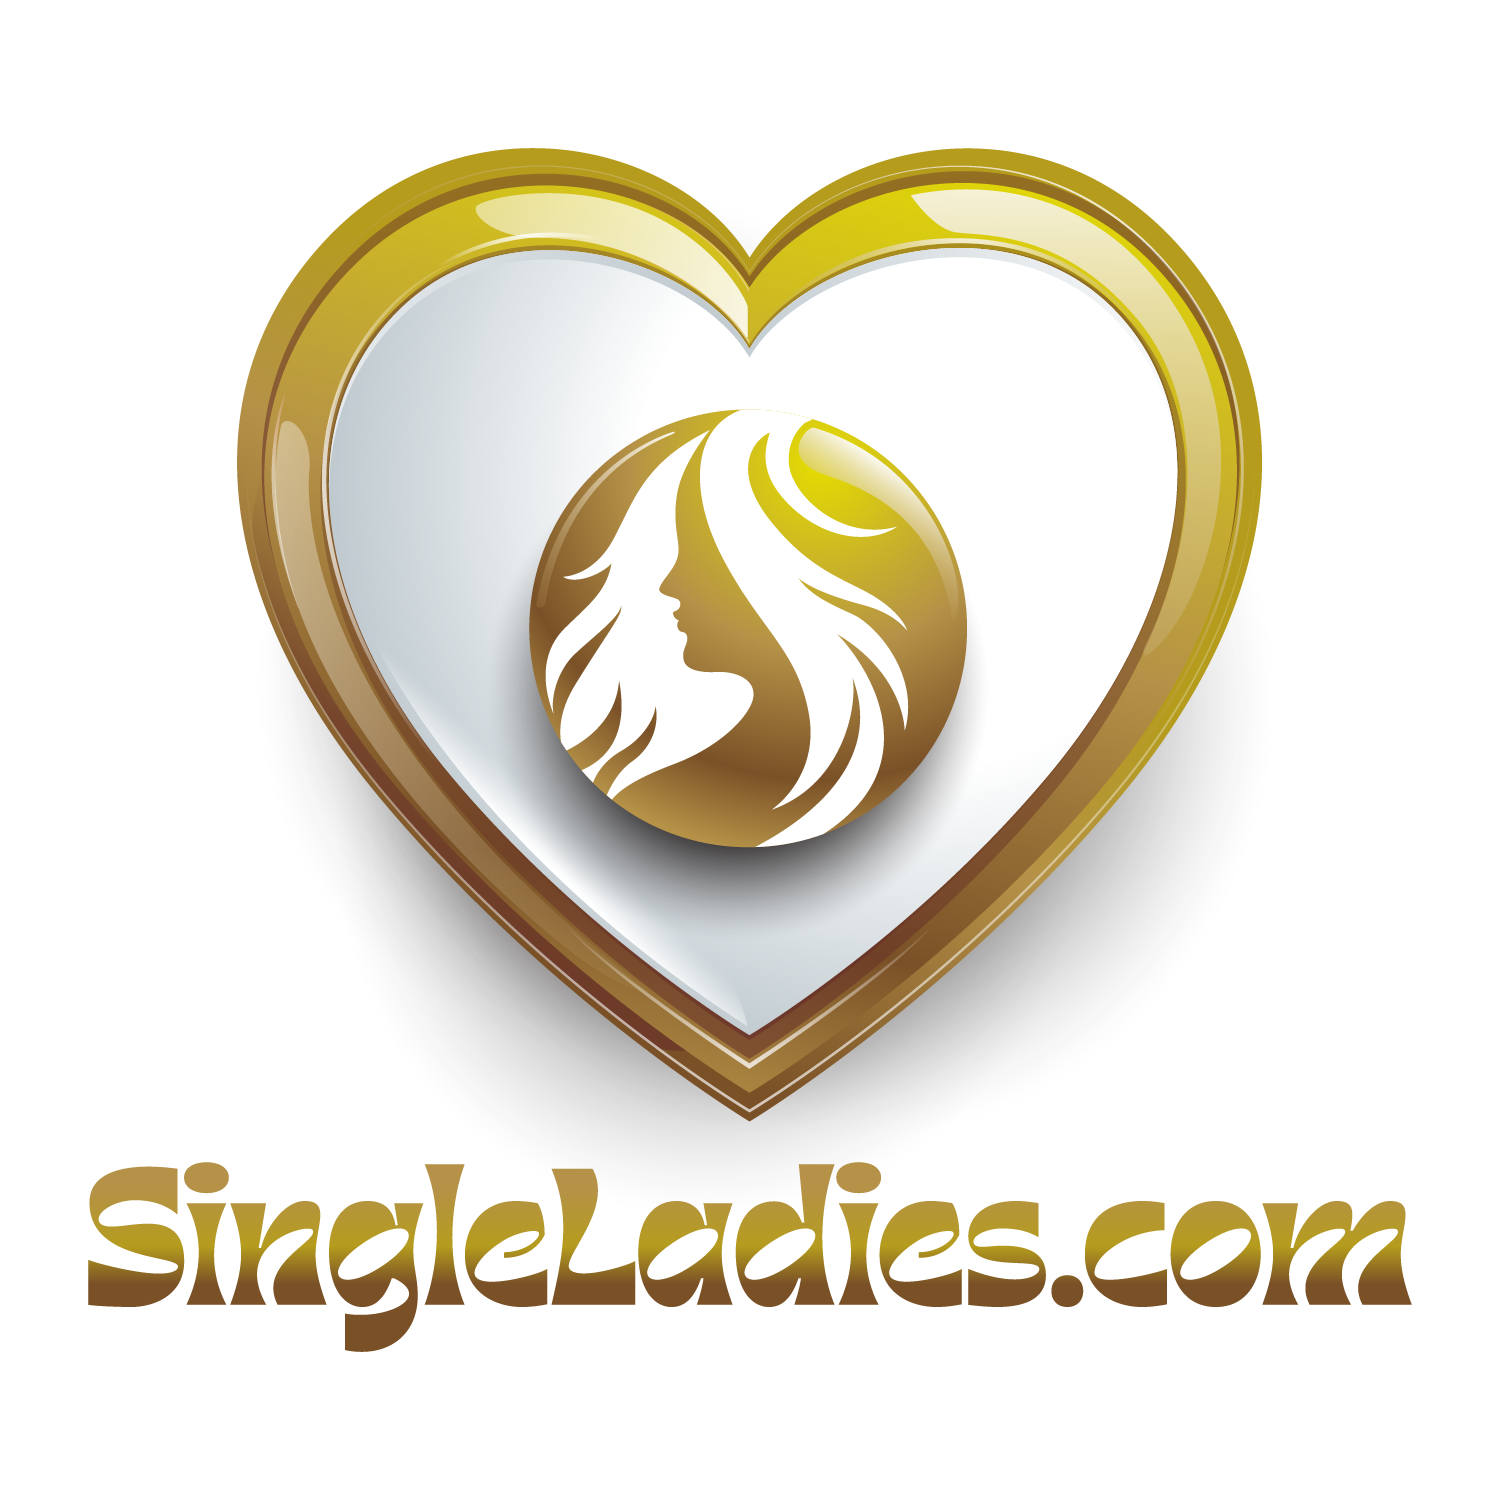 Your Journey to Love Starts Here - Find Your Perfect Match on SingleLasies.com